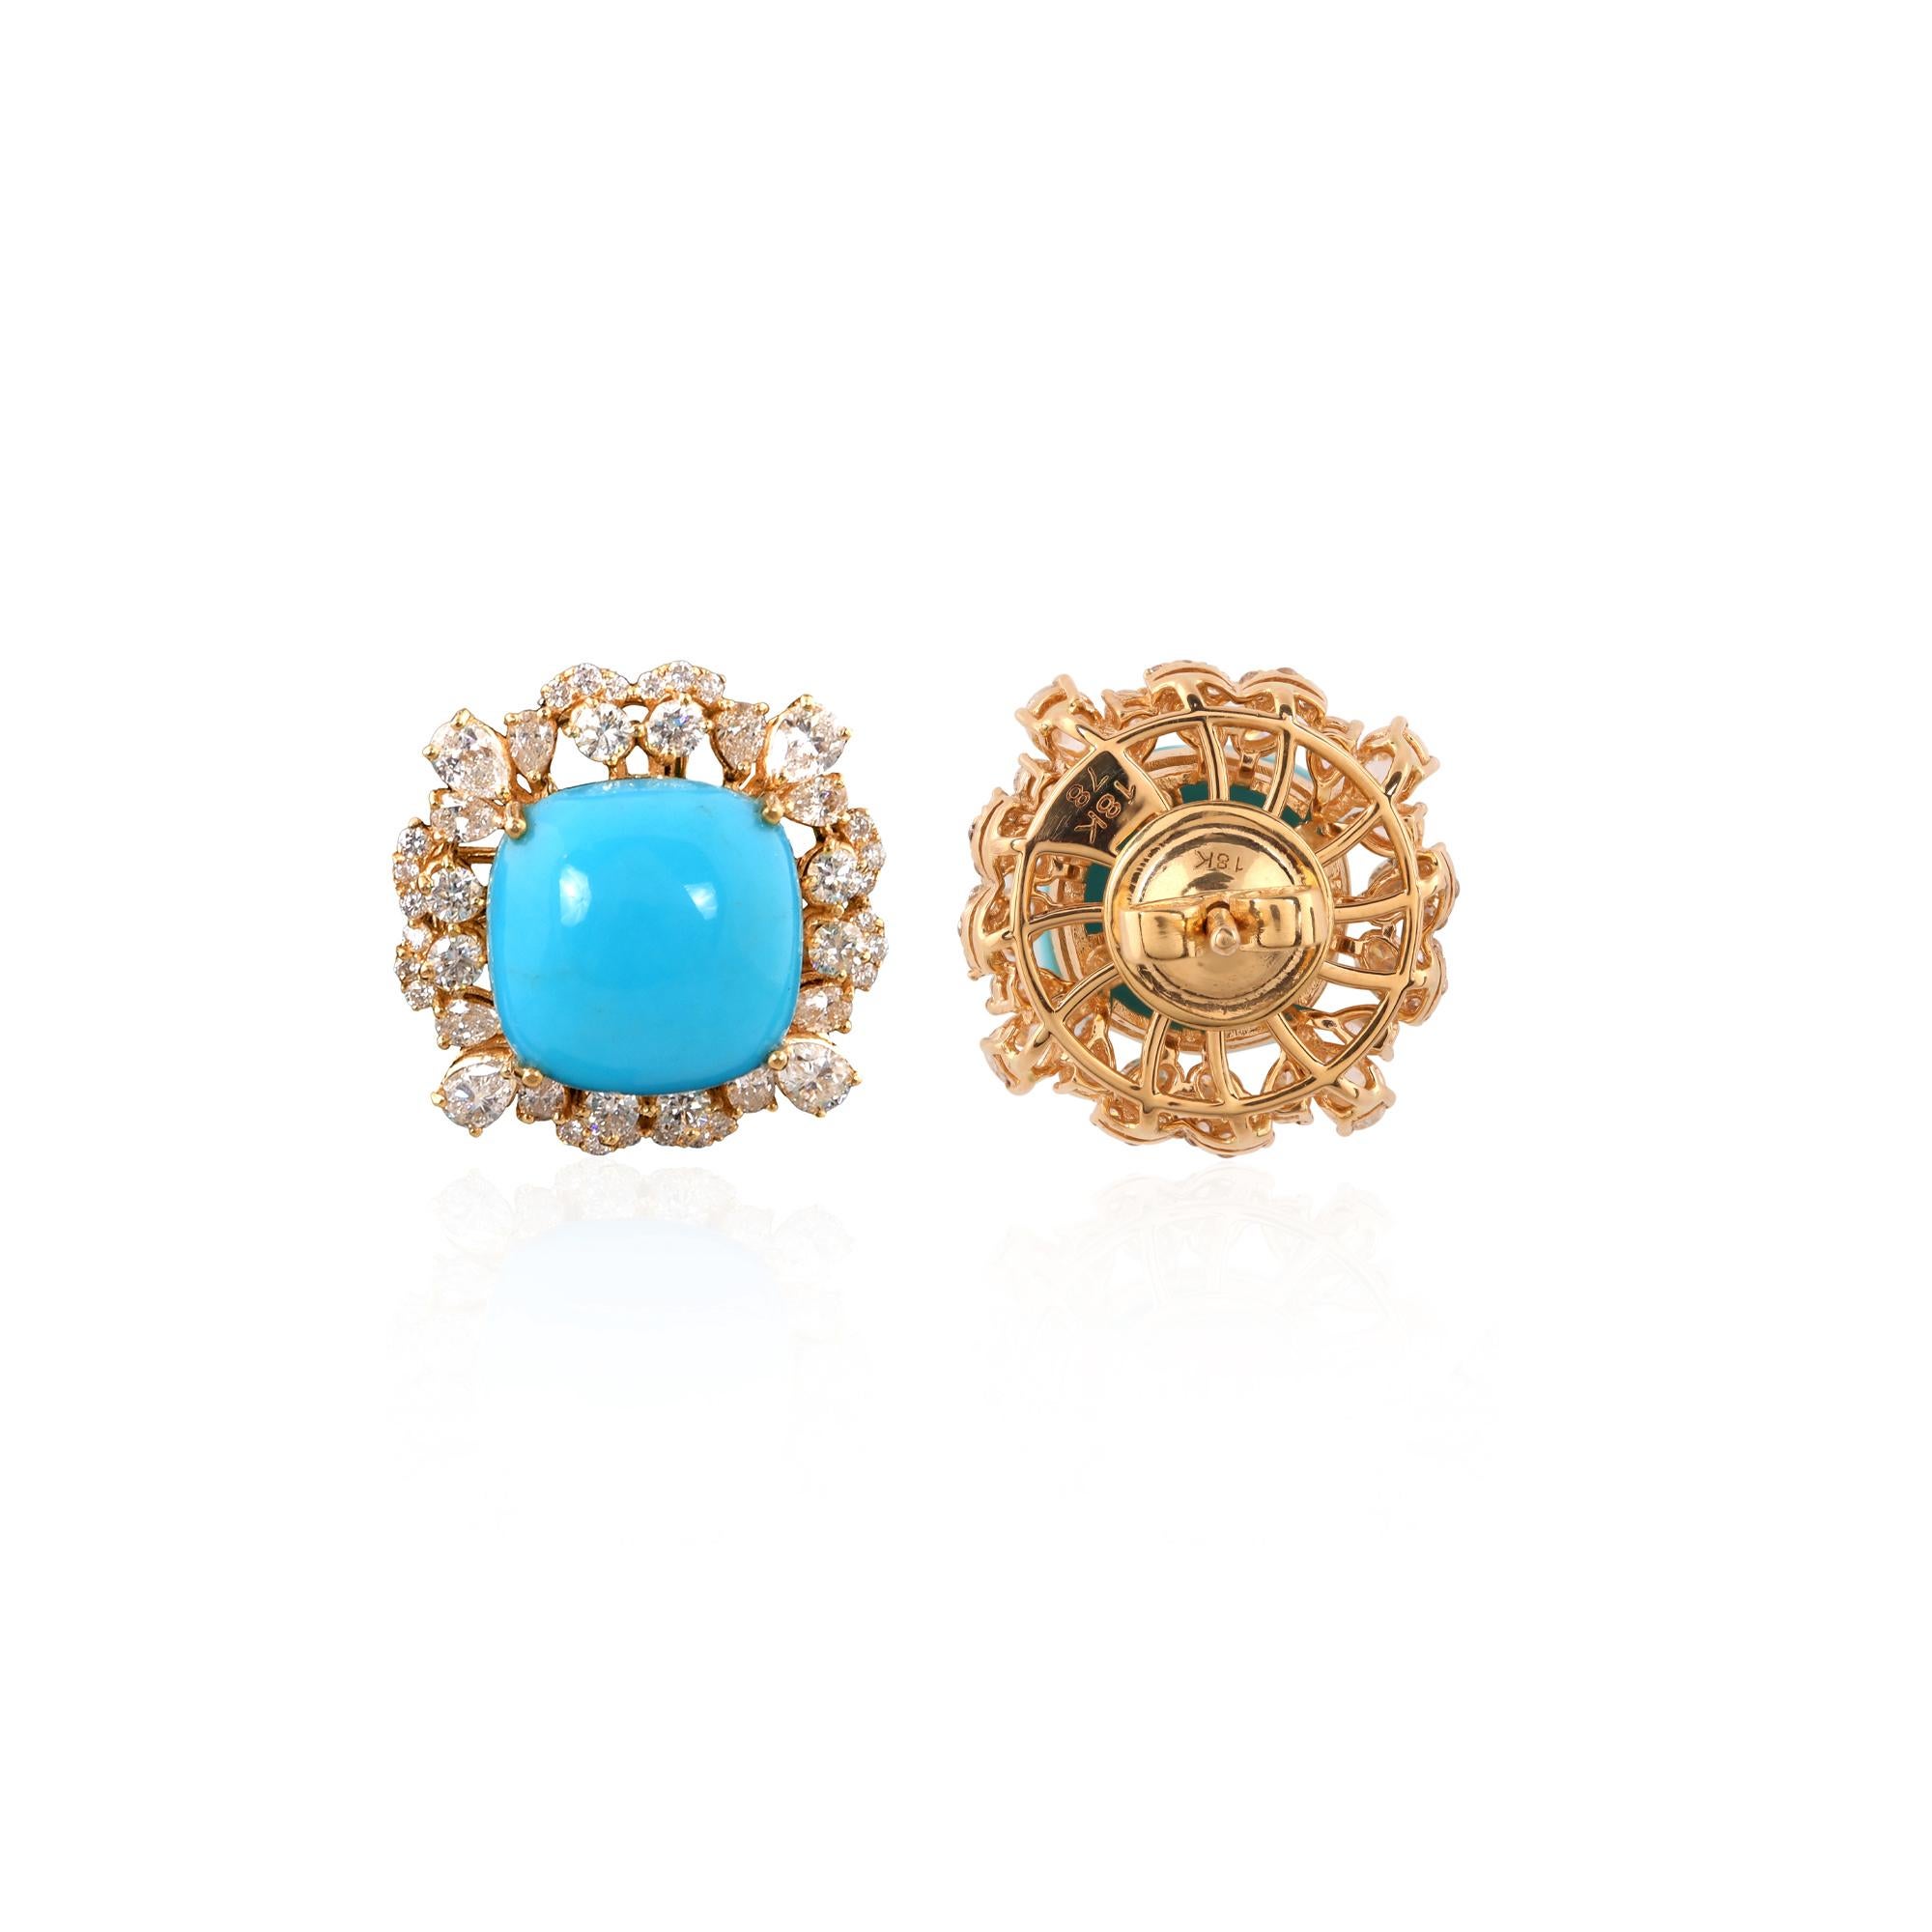 Indulge in the timeless elegance of these Arizona Turquoise Gemstone Stud Earrings, exquisitely crafted in 18 Karat Yellow Gold and adorned with sparkling diamonds. These earrings seamlessly blend luxury with natural beauty, making them a